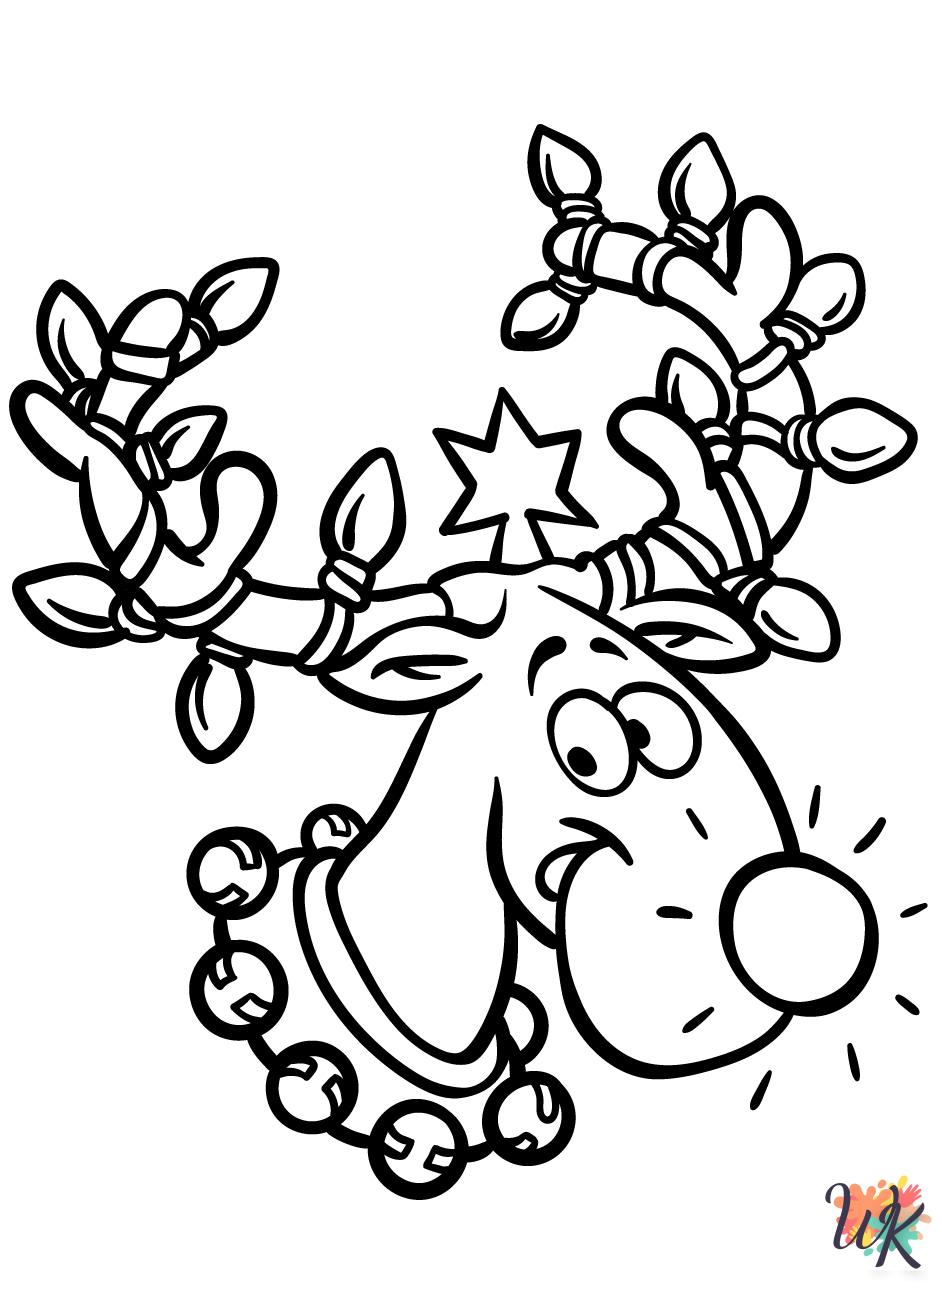 Rudolph coloring pages for kids